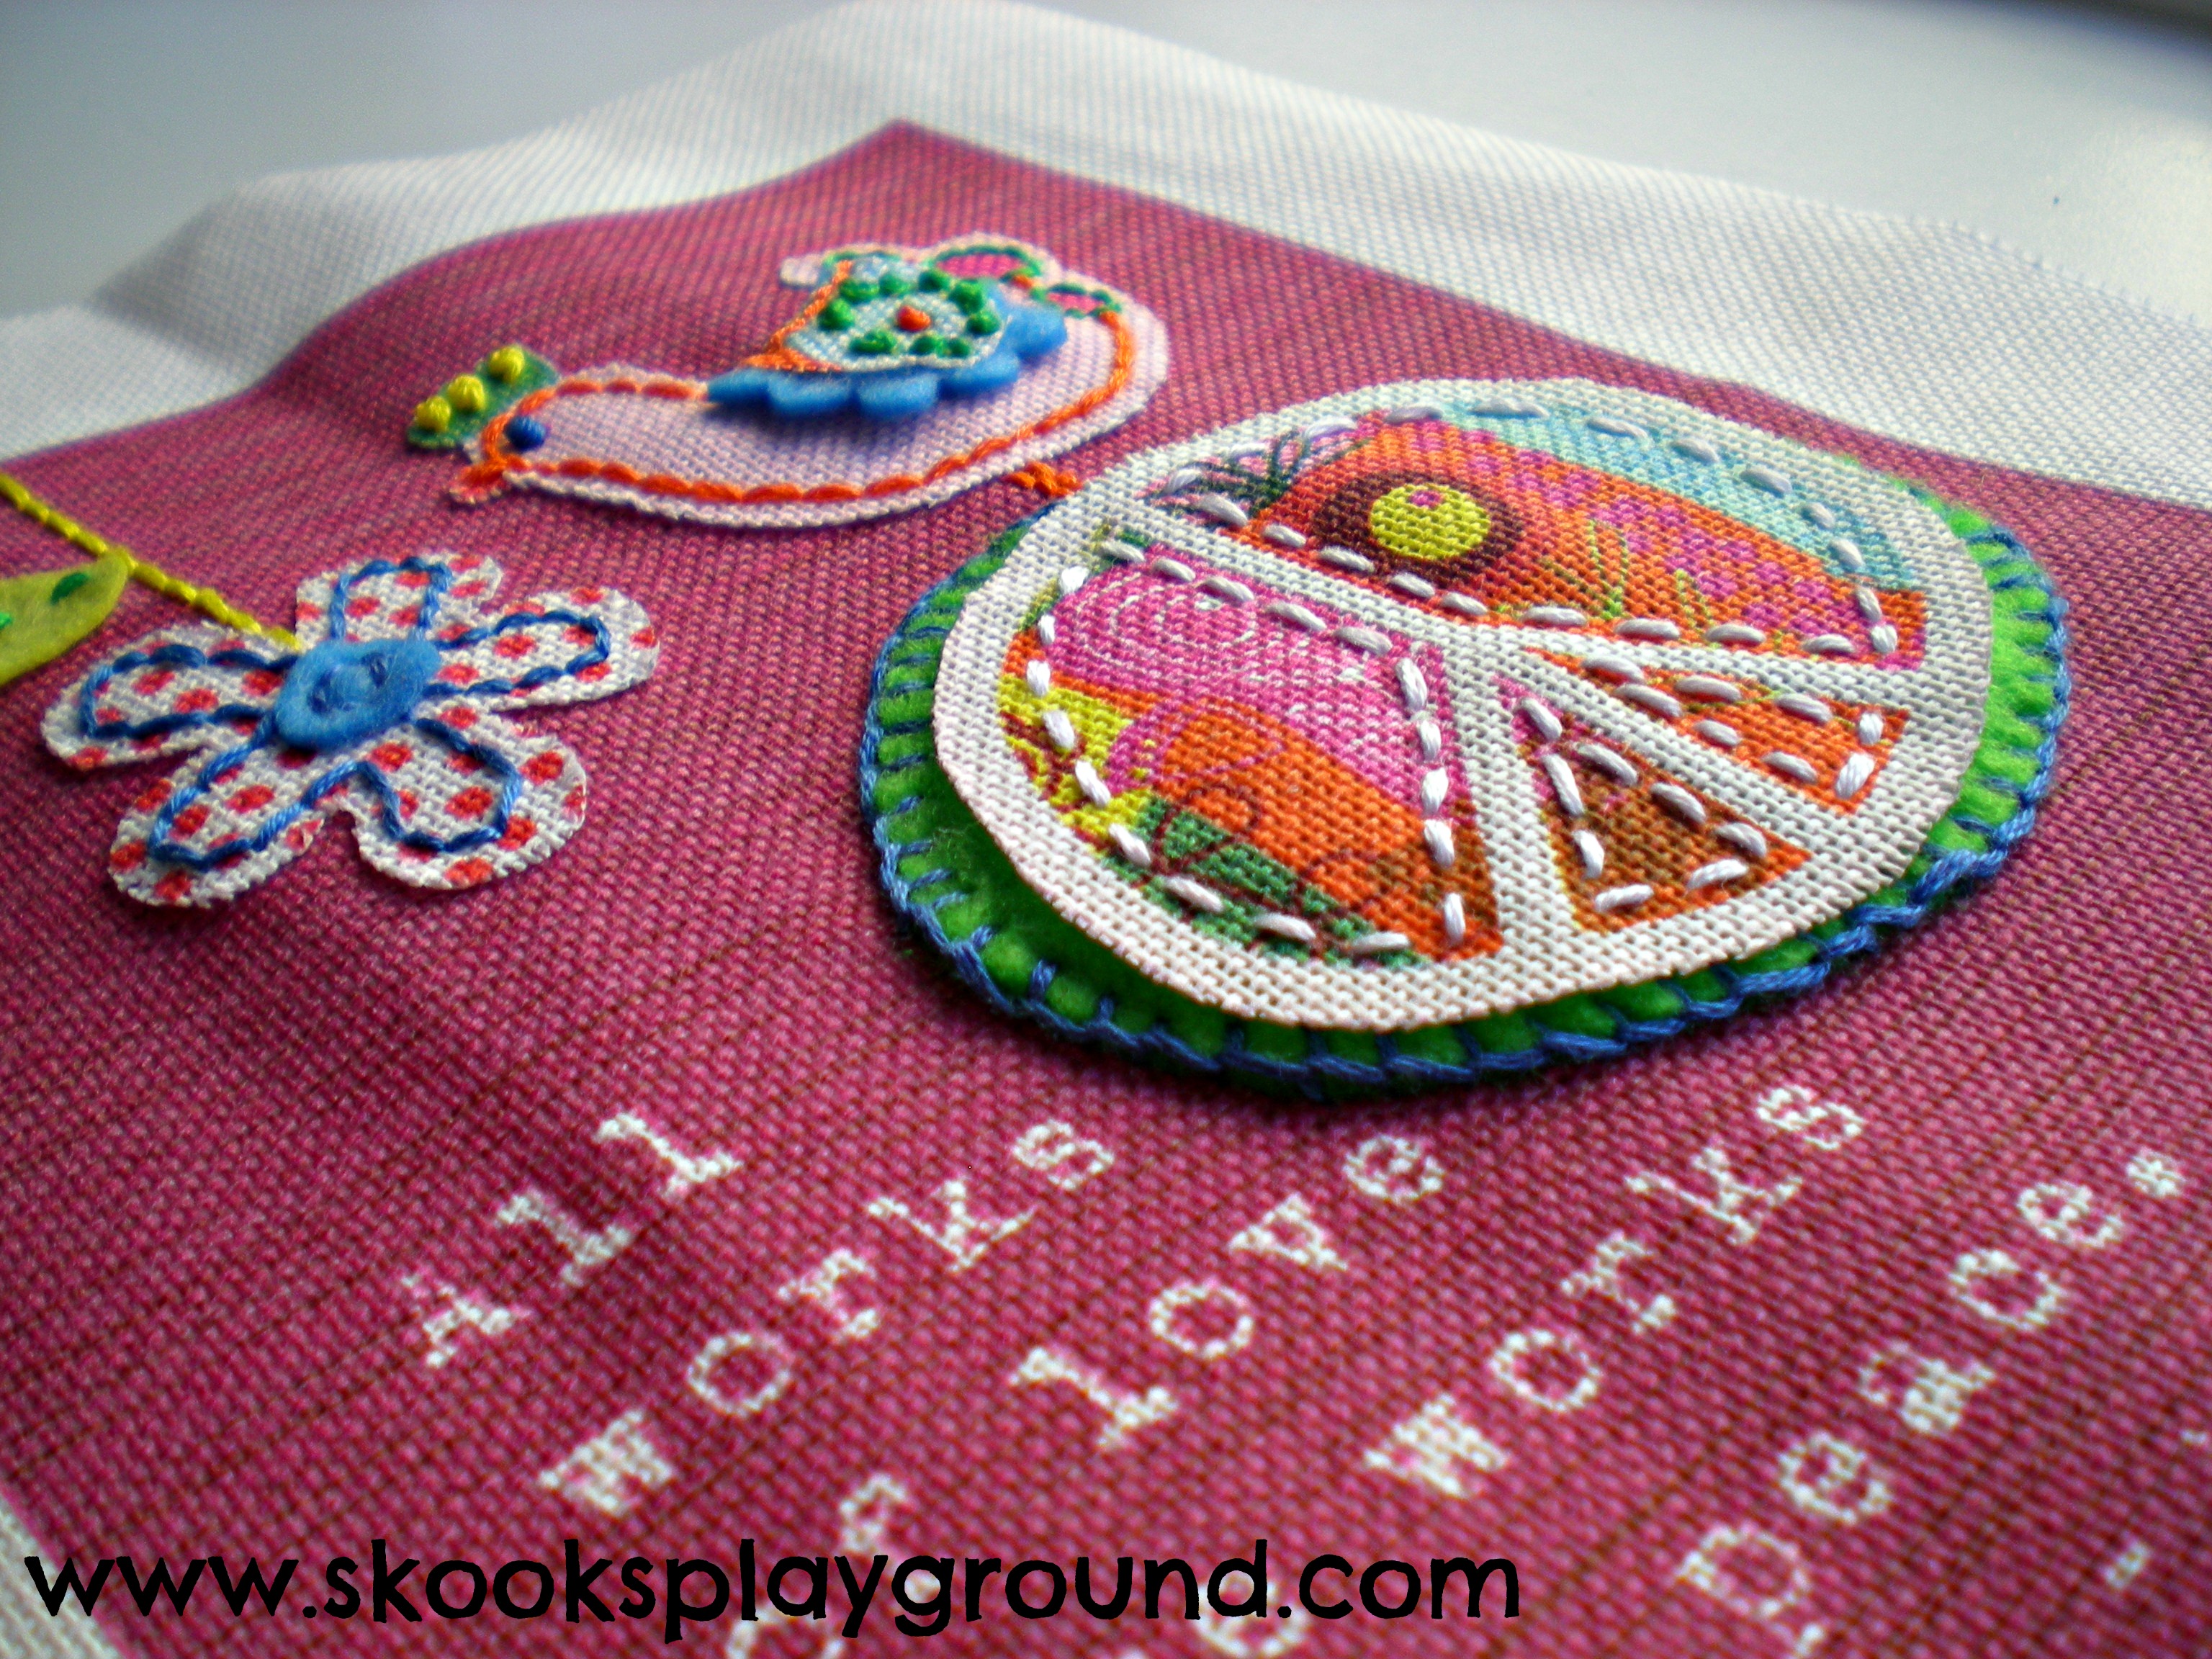 Embroidery Detail